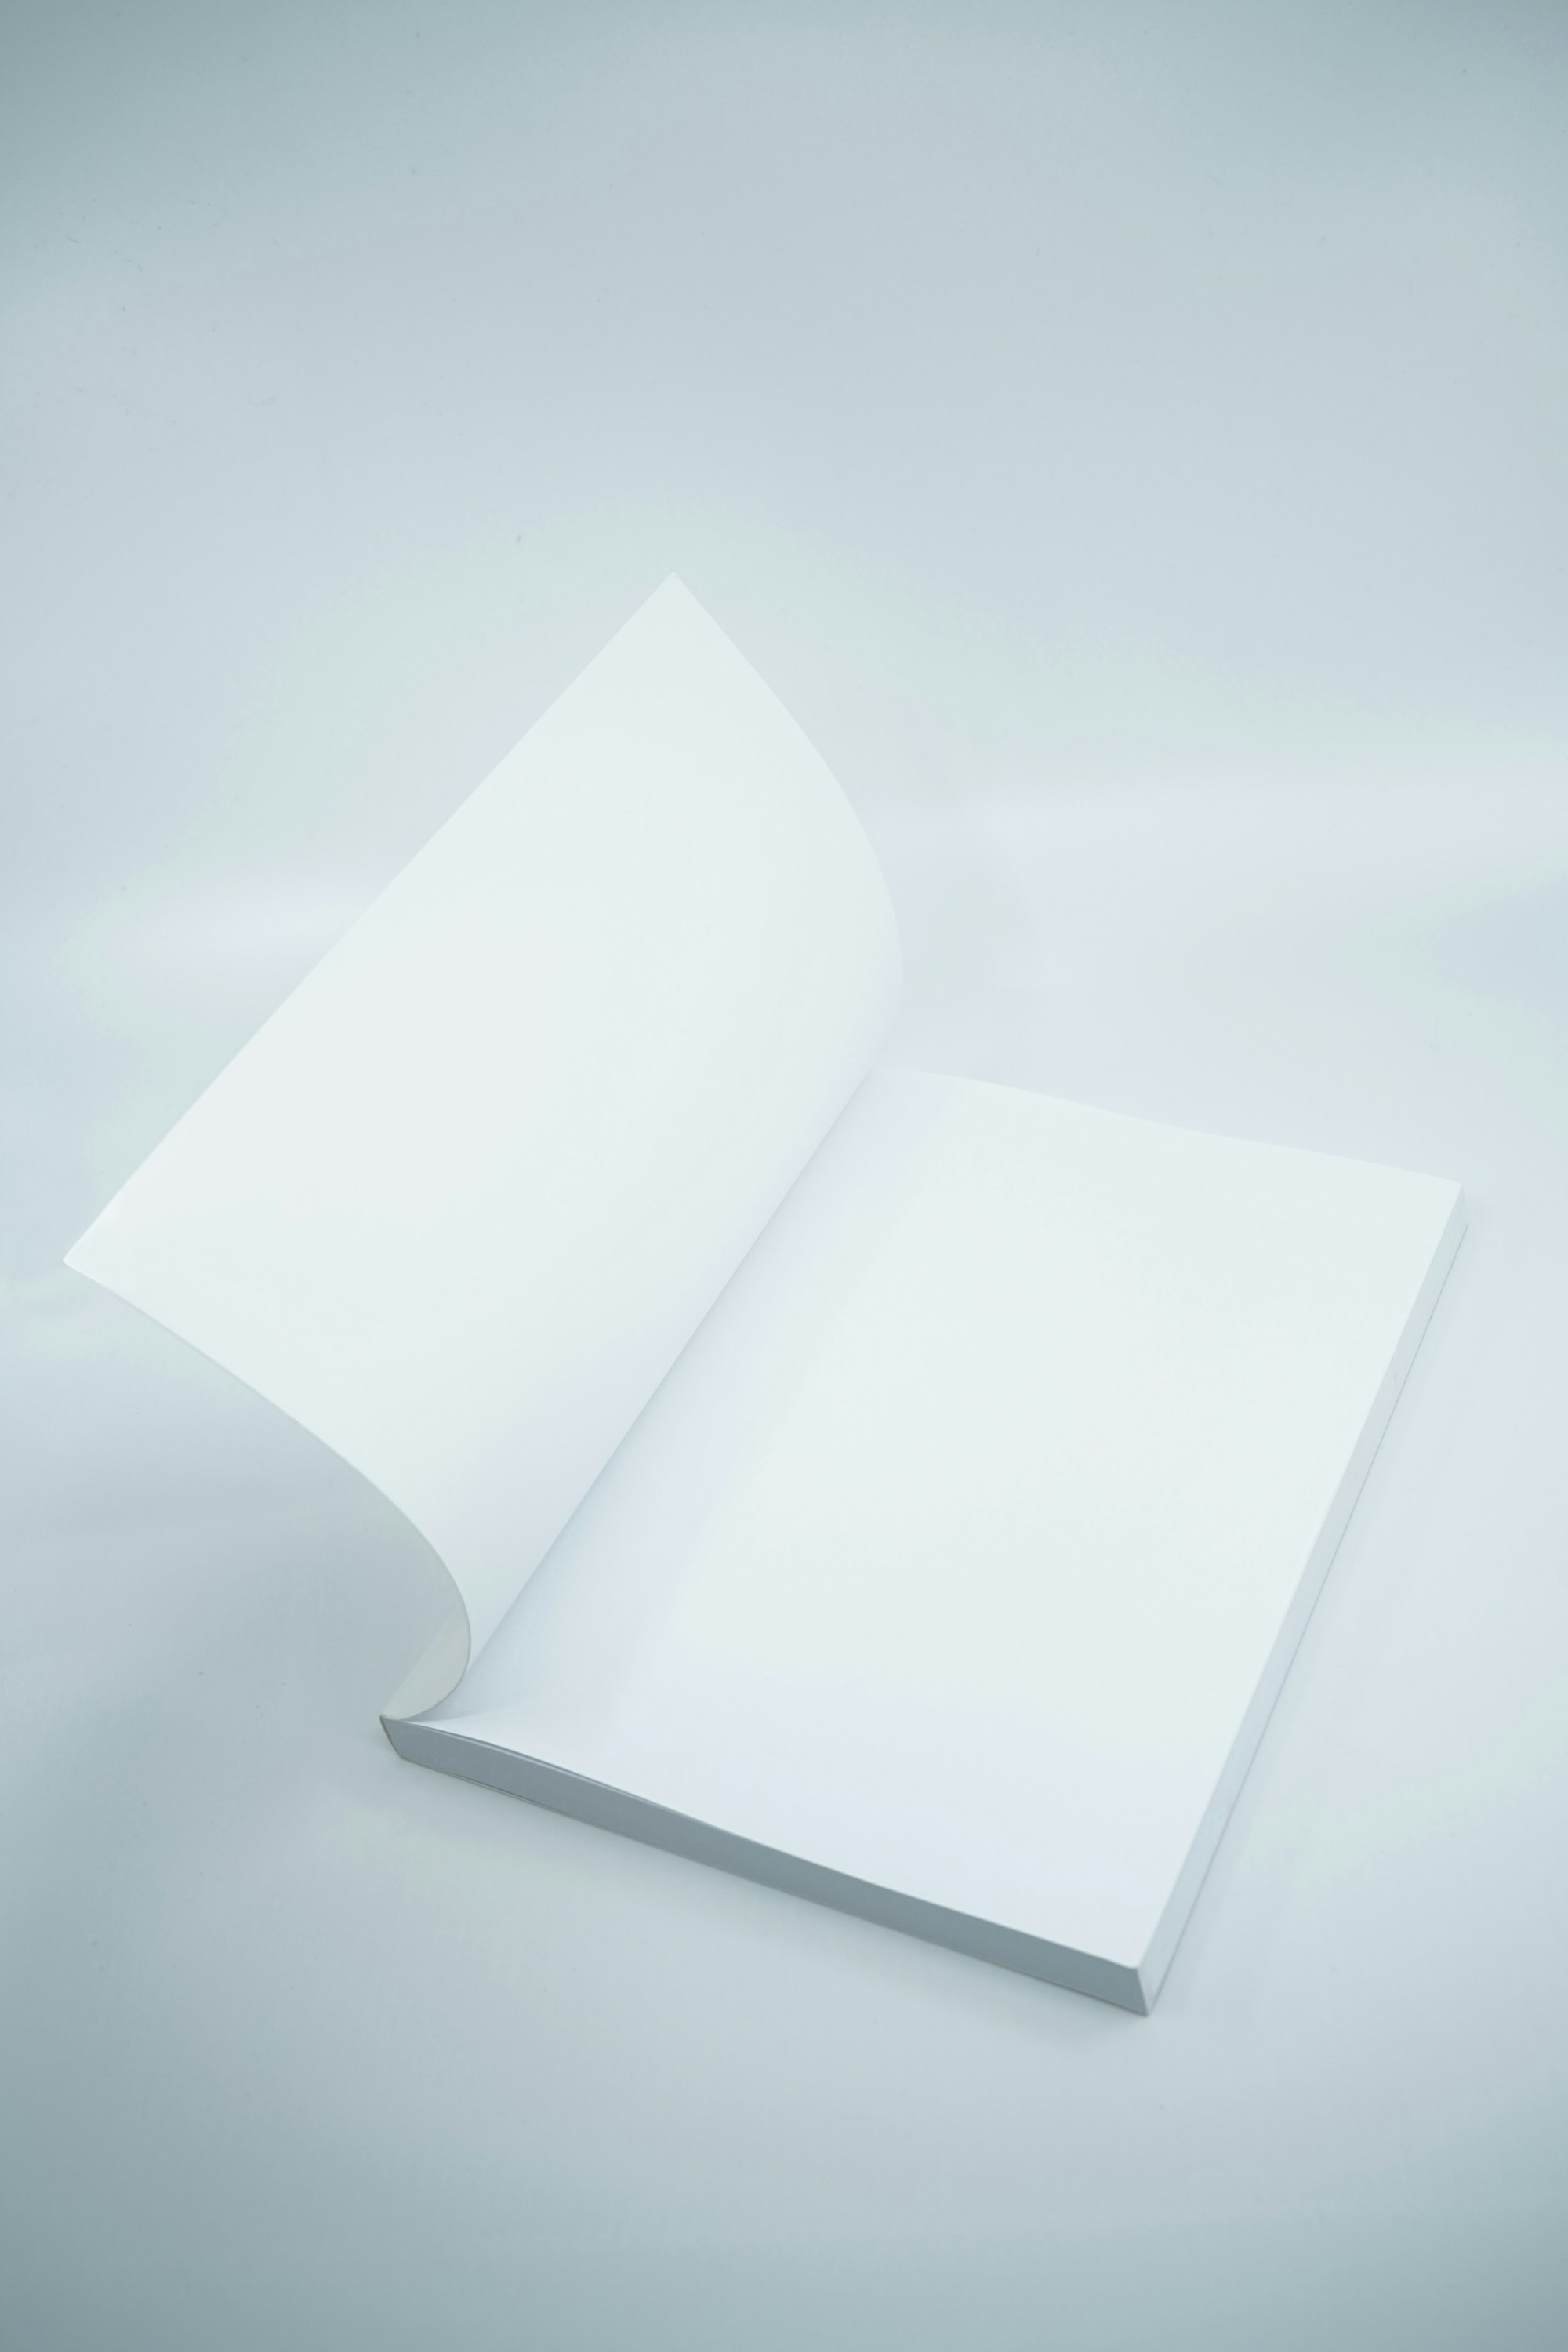 Minimal style photo featuring a blank white open softcover book mockup on a gray studio background scene.